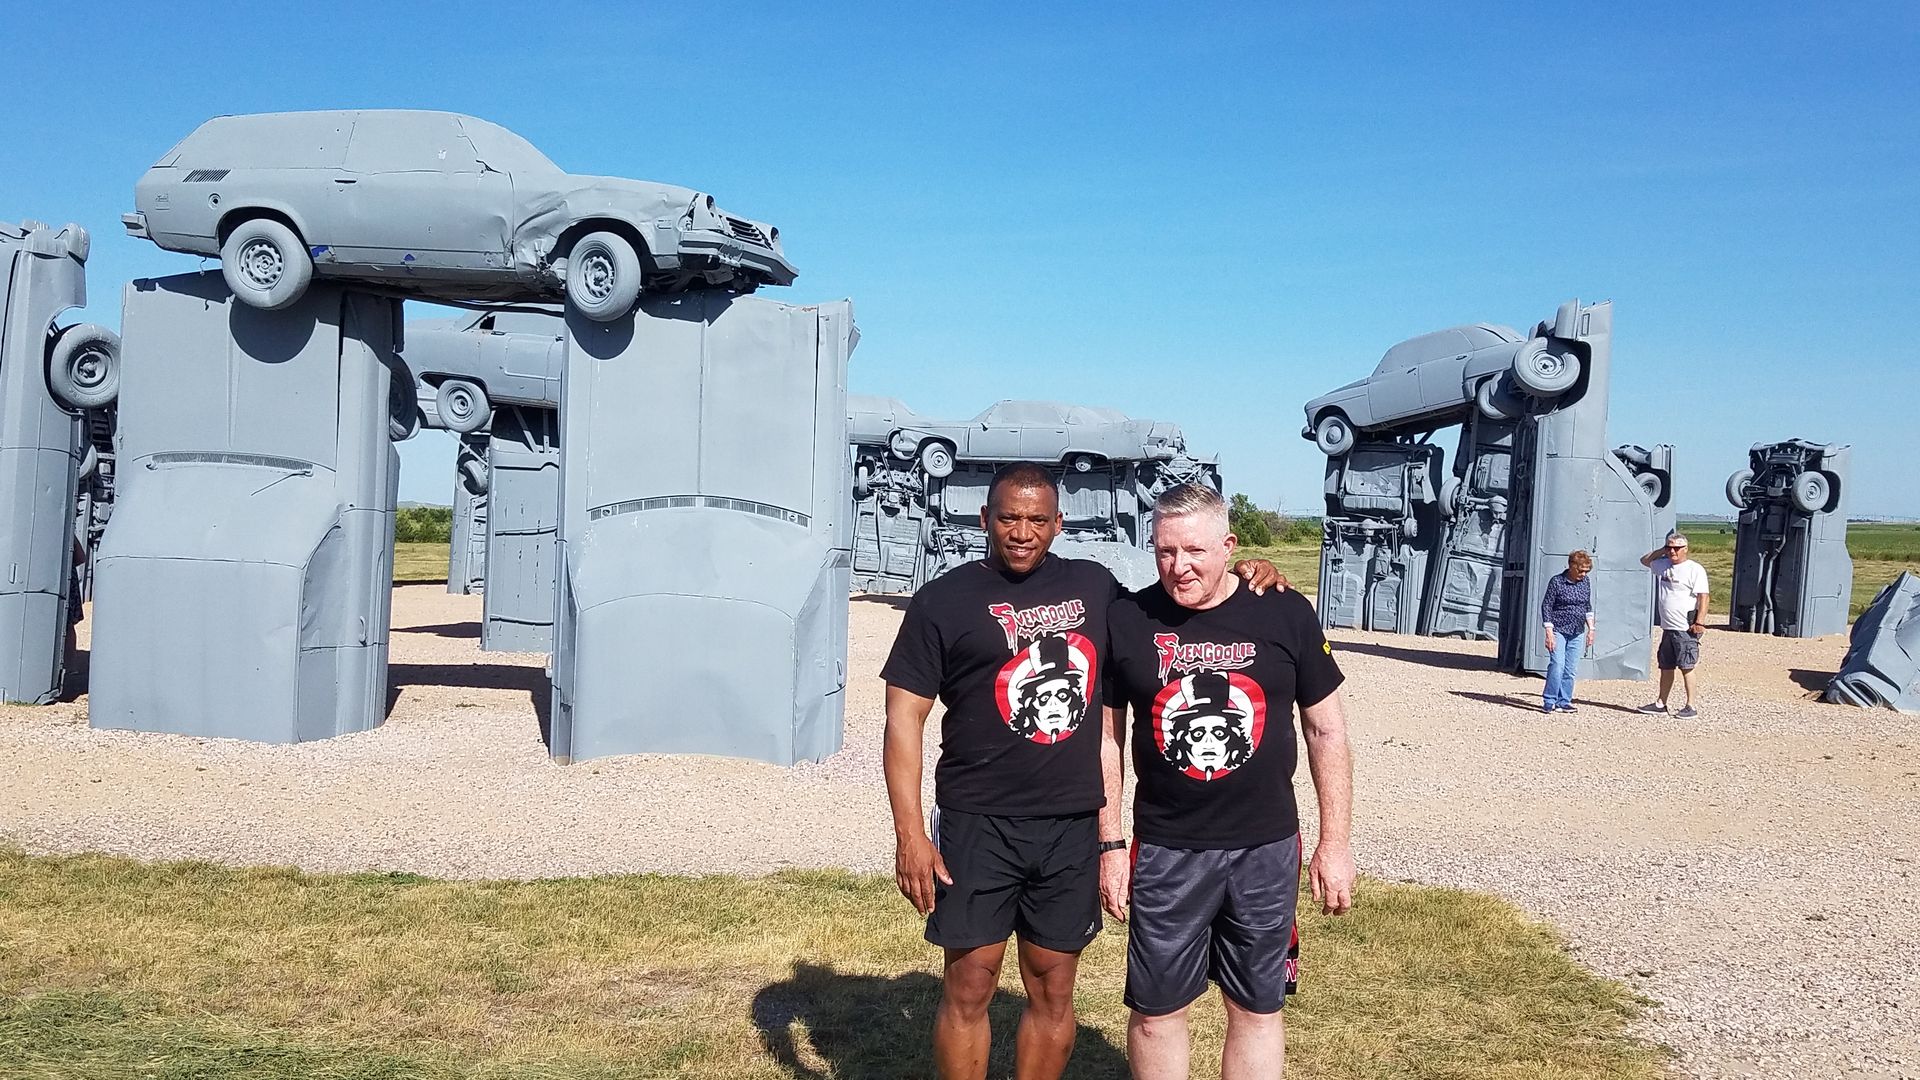 Two men standing in front of "Carhenge," a Stonehenge-style statue of cars on plinths.